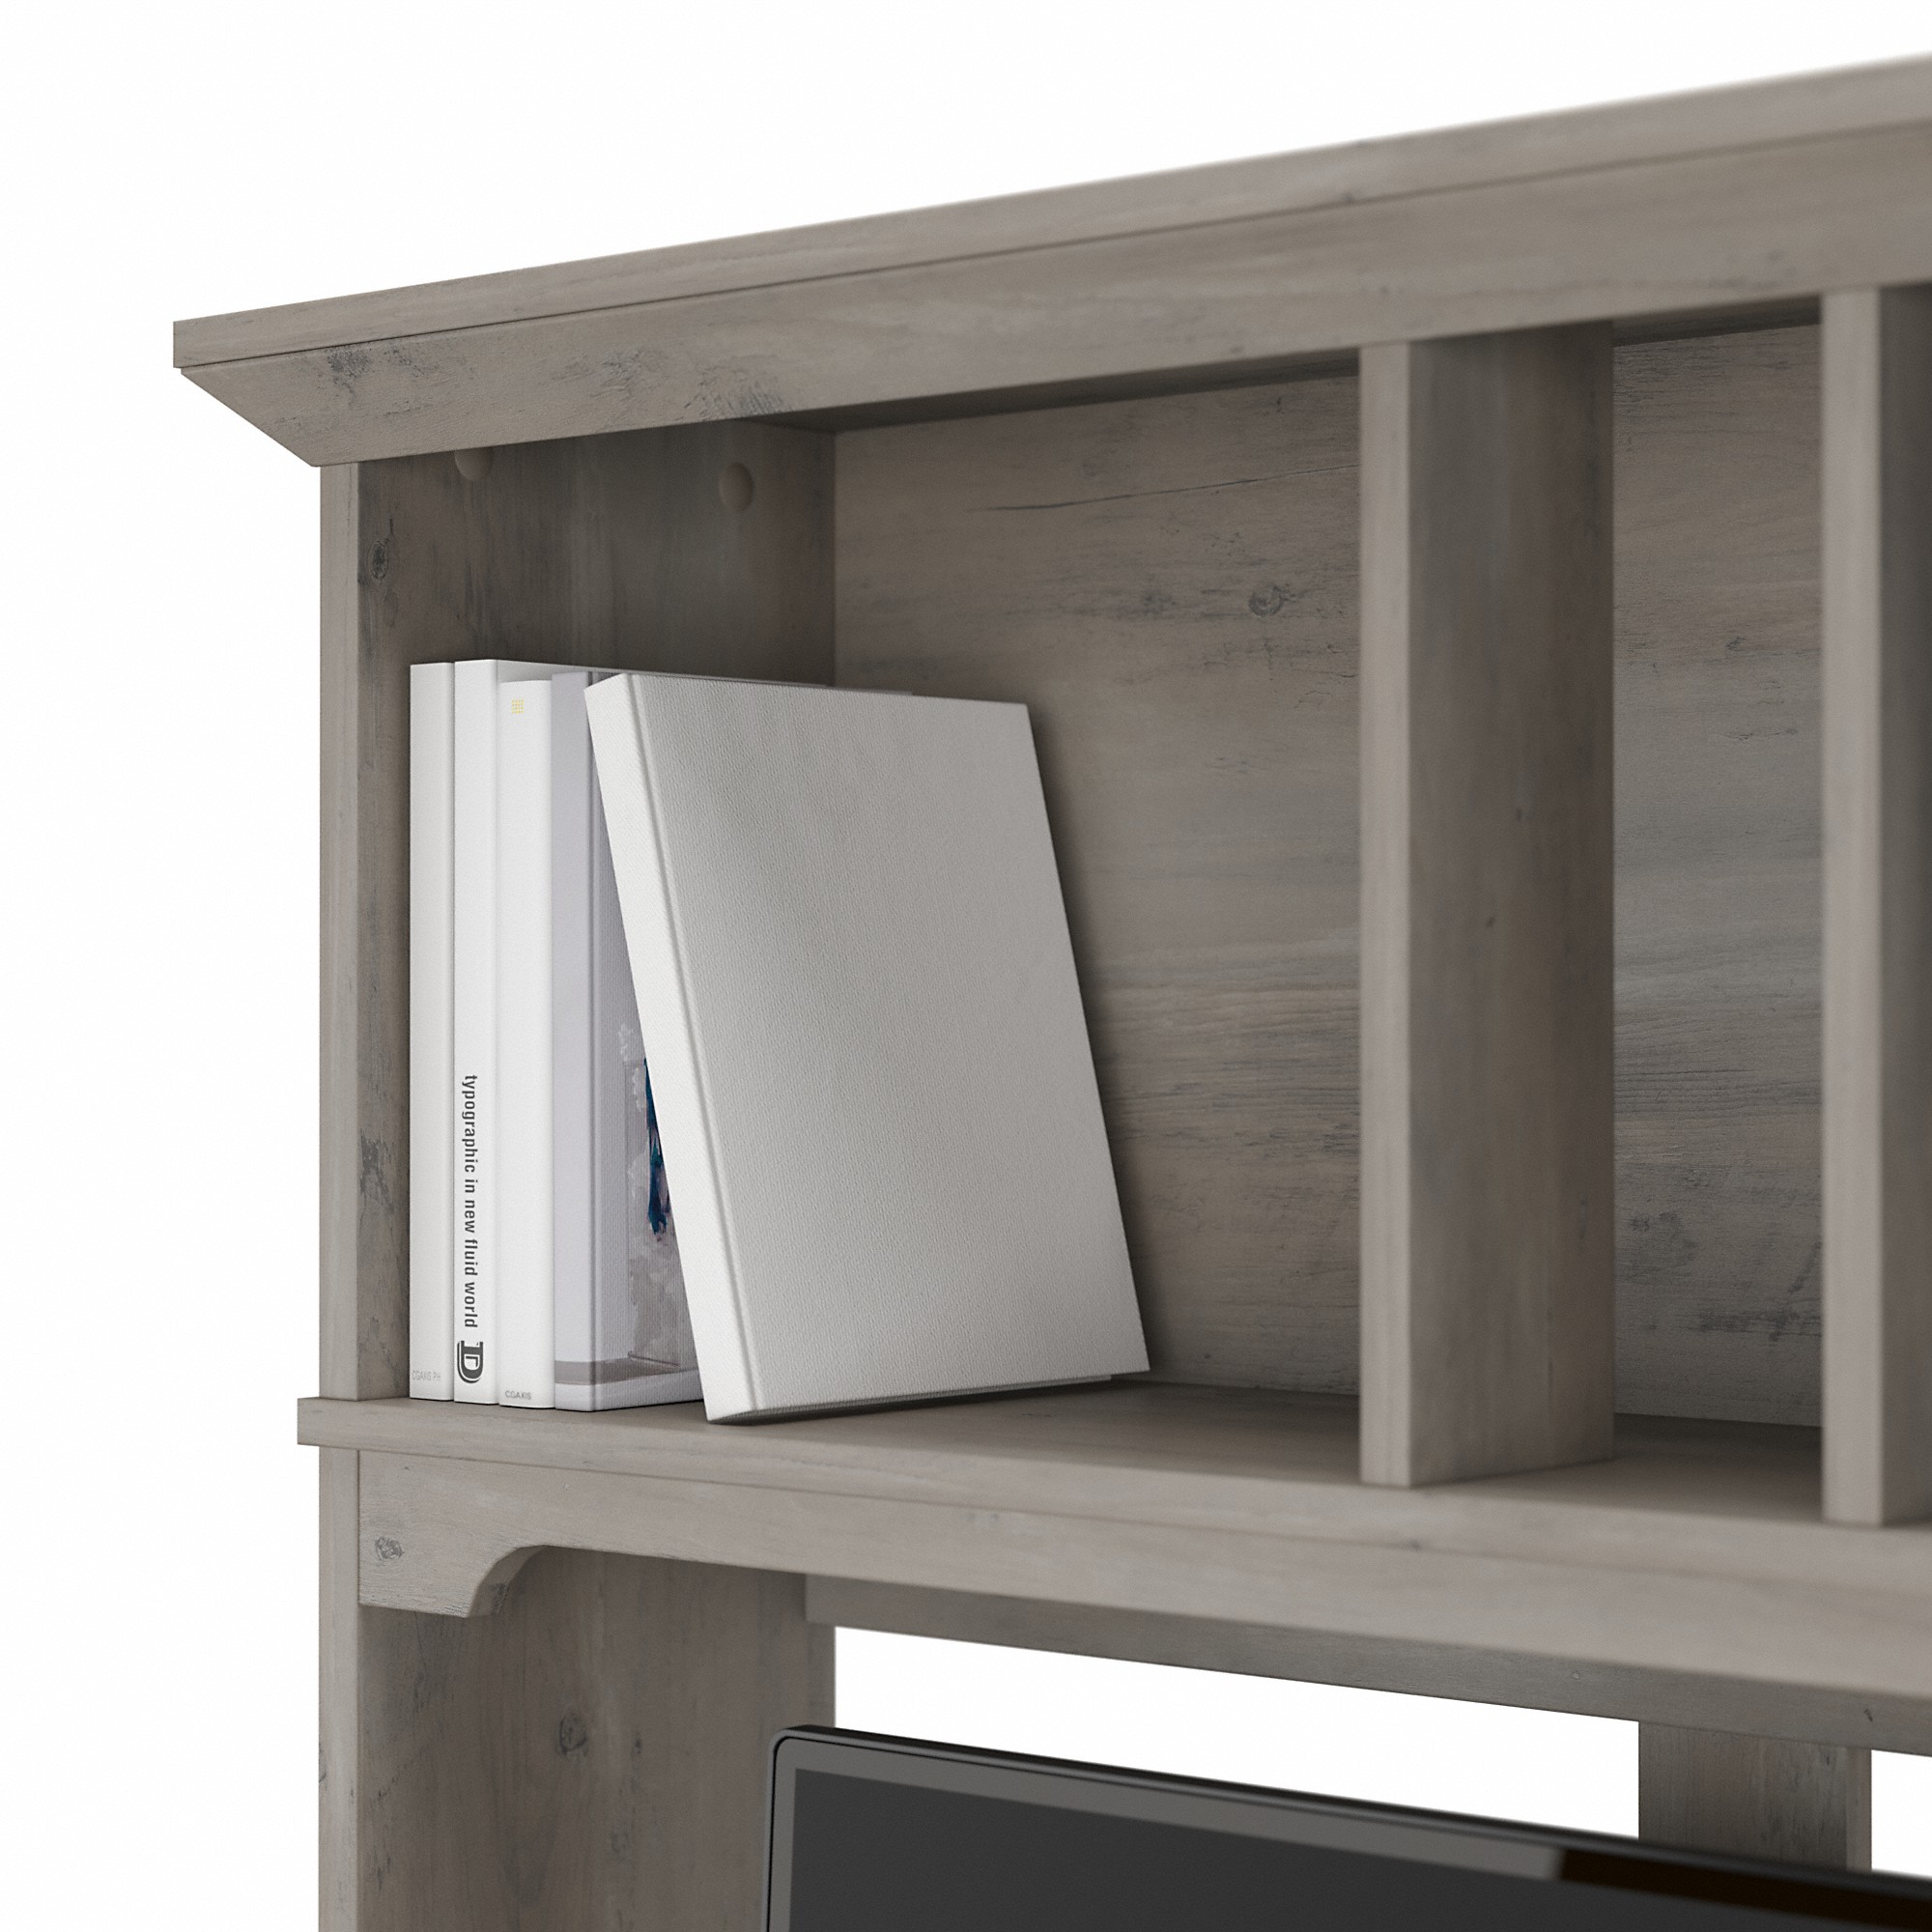 Bush Furniture Salinas 60" L Desk and Hutch with Storage, Driftwood Gray - image 4 of 8